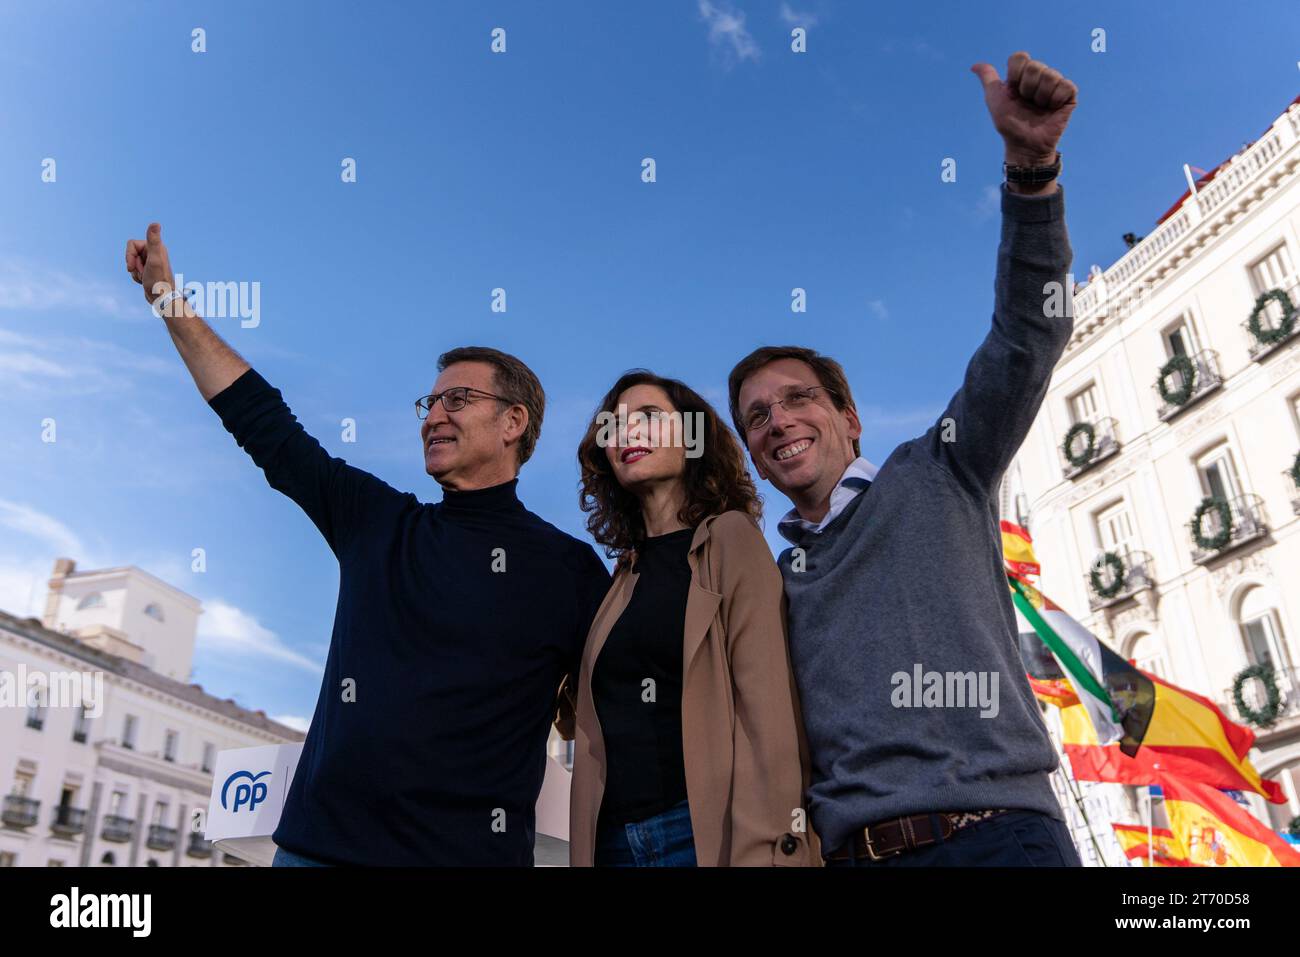 The PP leader Alberto Nunez Feijoo (L), the President of the Autonomous Government of Madrid, Isabel Diaz Ayuso (C), and the Mayor of Madrid Jose Luis Martinez Almeida (R) are seen during the demonstration in Puerta del Sol. Demonstration organized by the Popular Party against the pact between the PSOE(Spanish Socialist Workers' Party) and Junts(Catalan political party's ) signed last November 9 in Brussels to invest the acting Prime Minister and Socialist candidate for re-election, Pedro Sanchez. The pact with Junts includes a possible amnesty law for those convicted of the ‘process'. Stock Photo